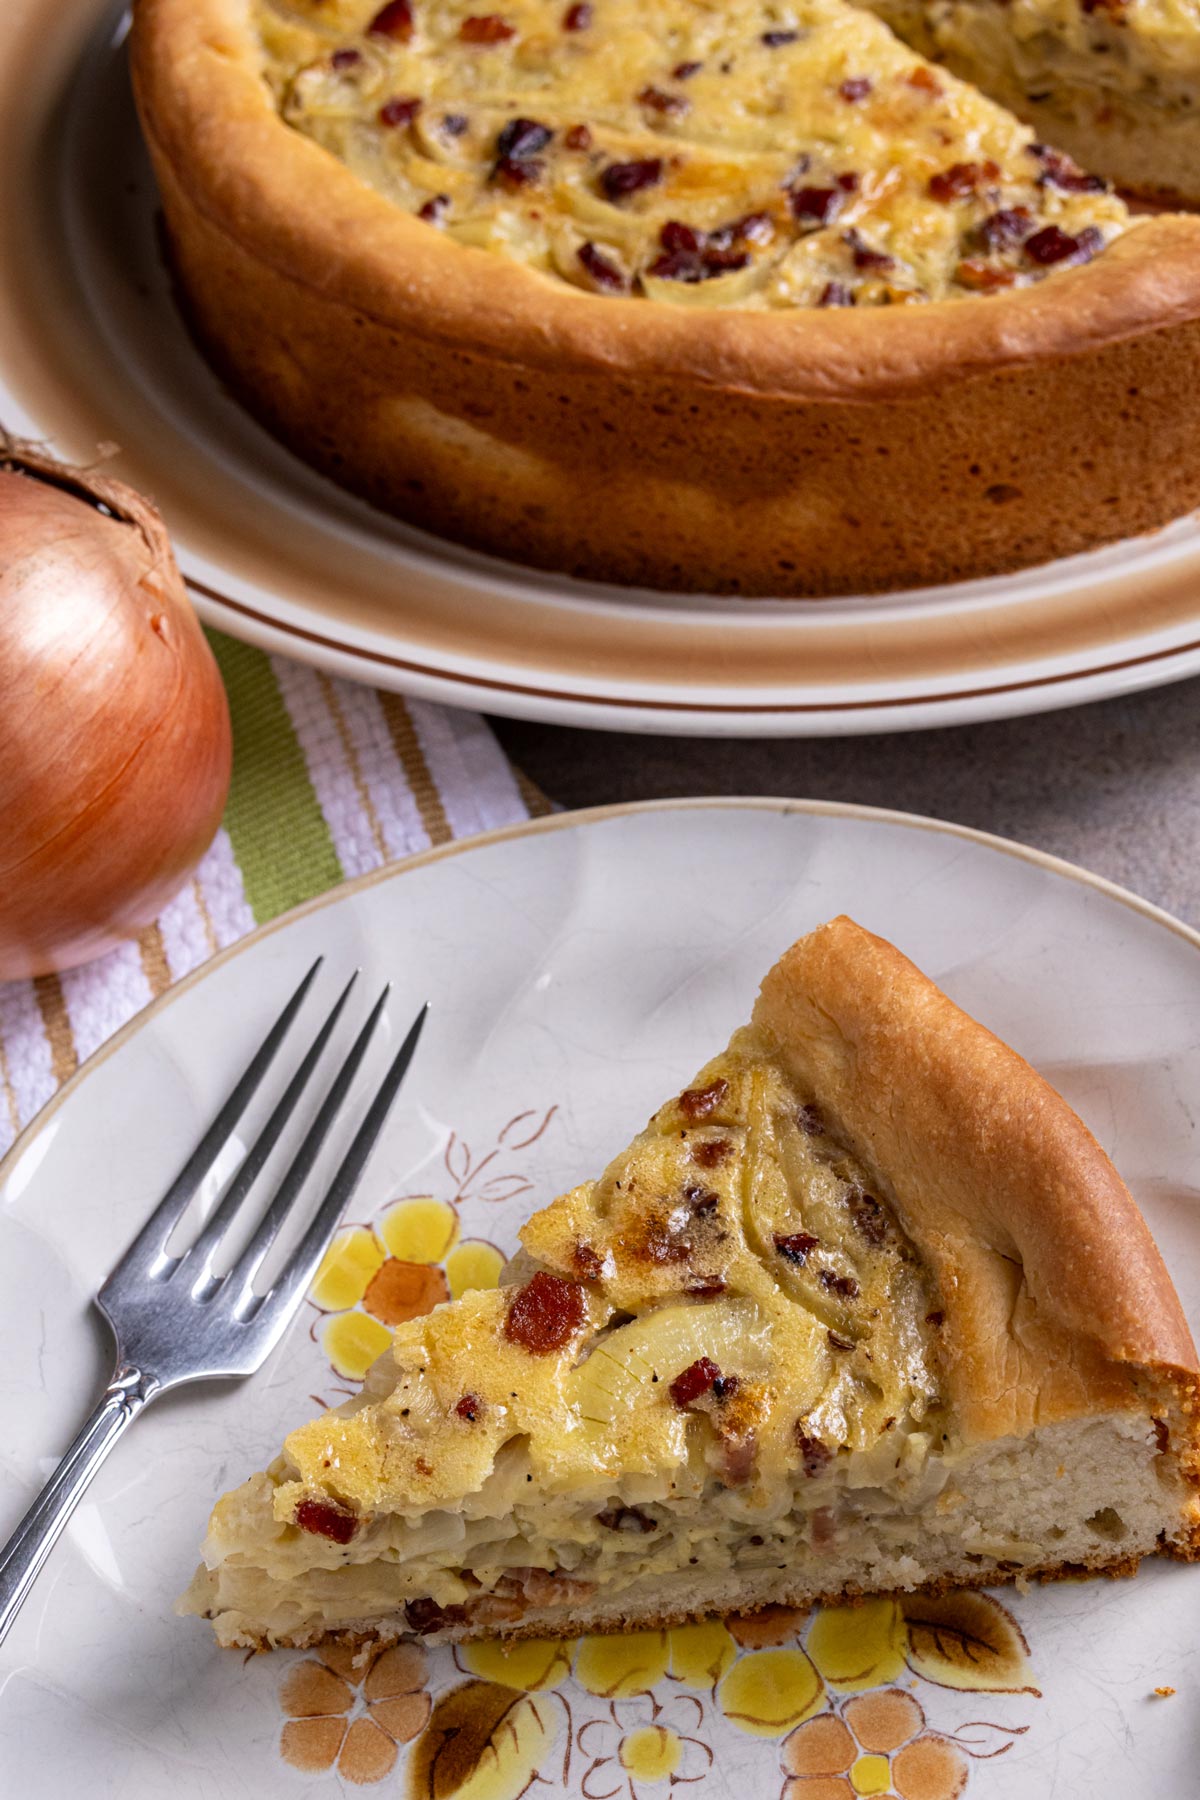 A slice of zwiebelkuchen on a plate with a fork, with the remaining onion pie behind it.